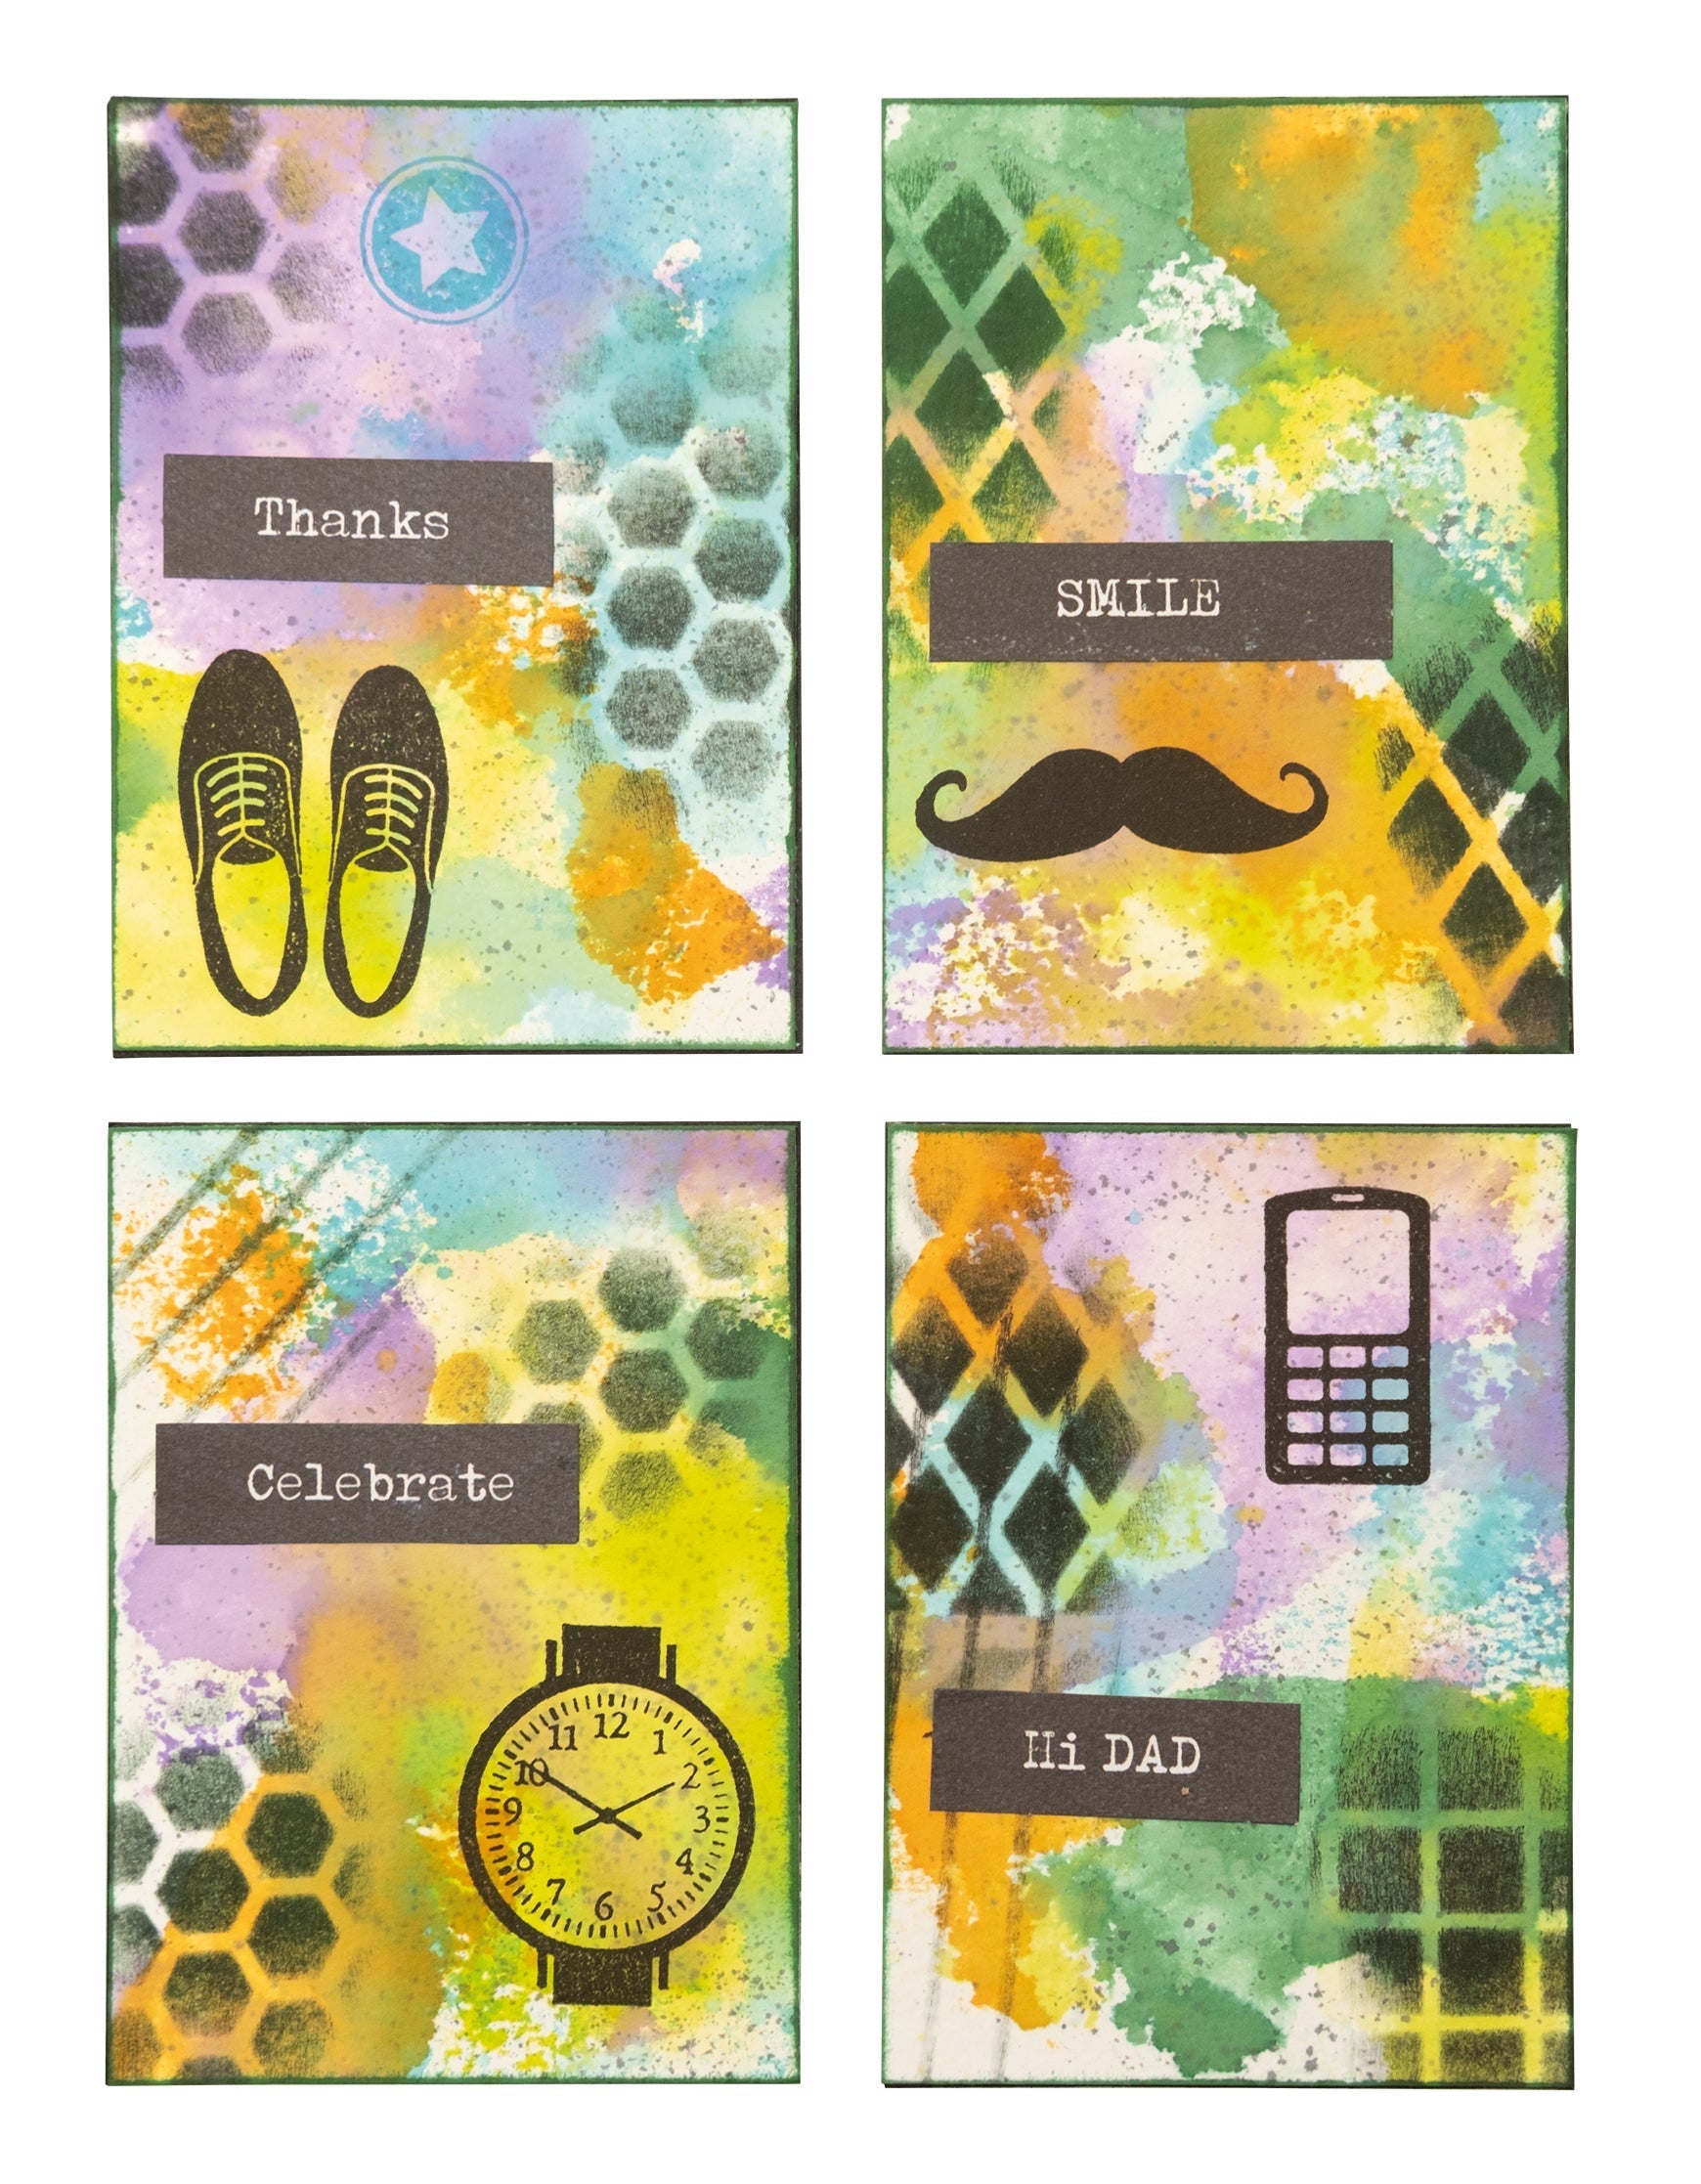 SL Clear Stamp Gifts For Him Essentials 6 PC